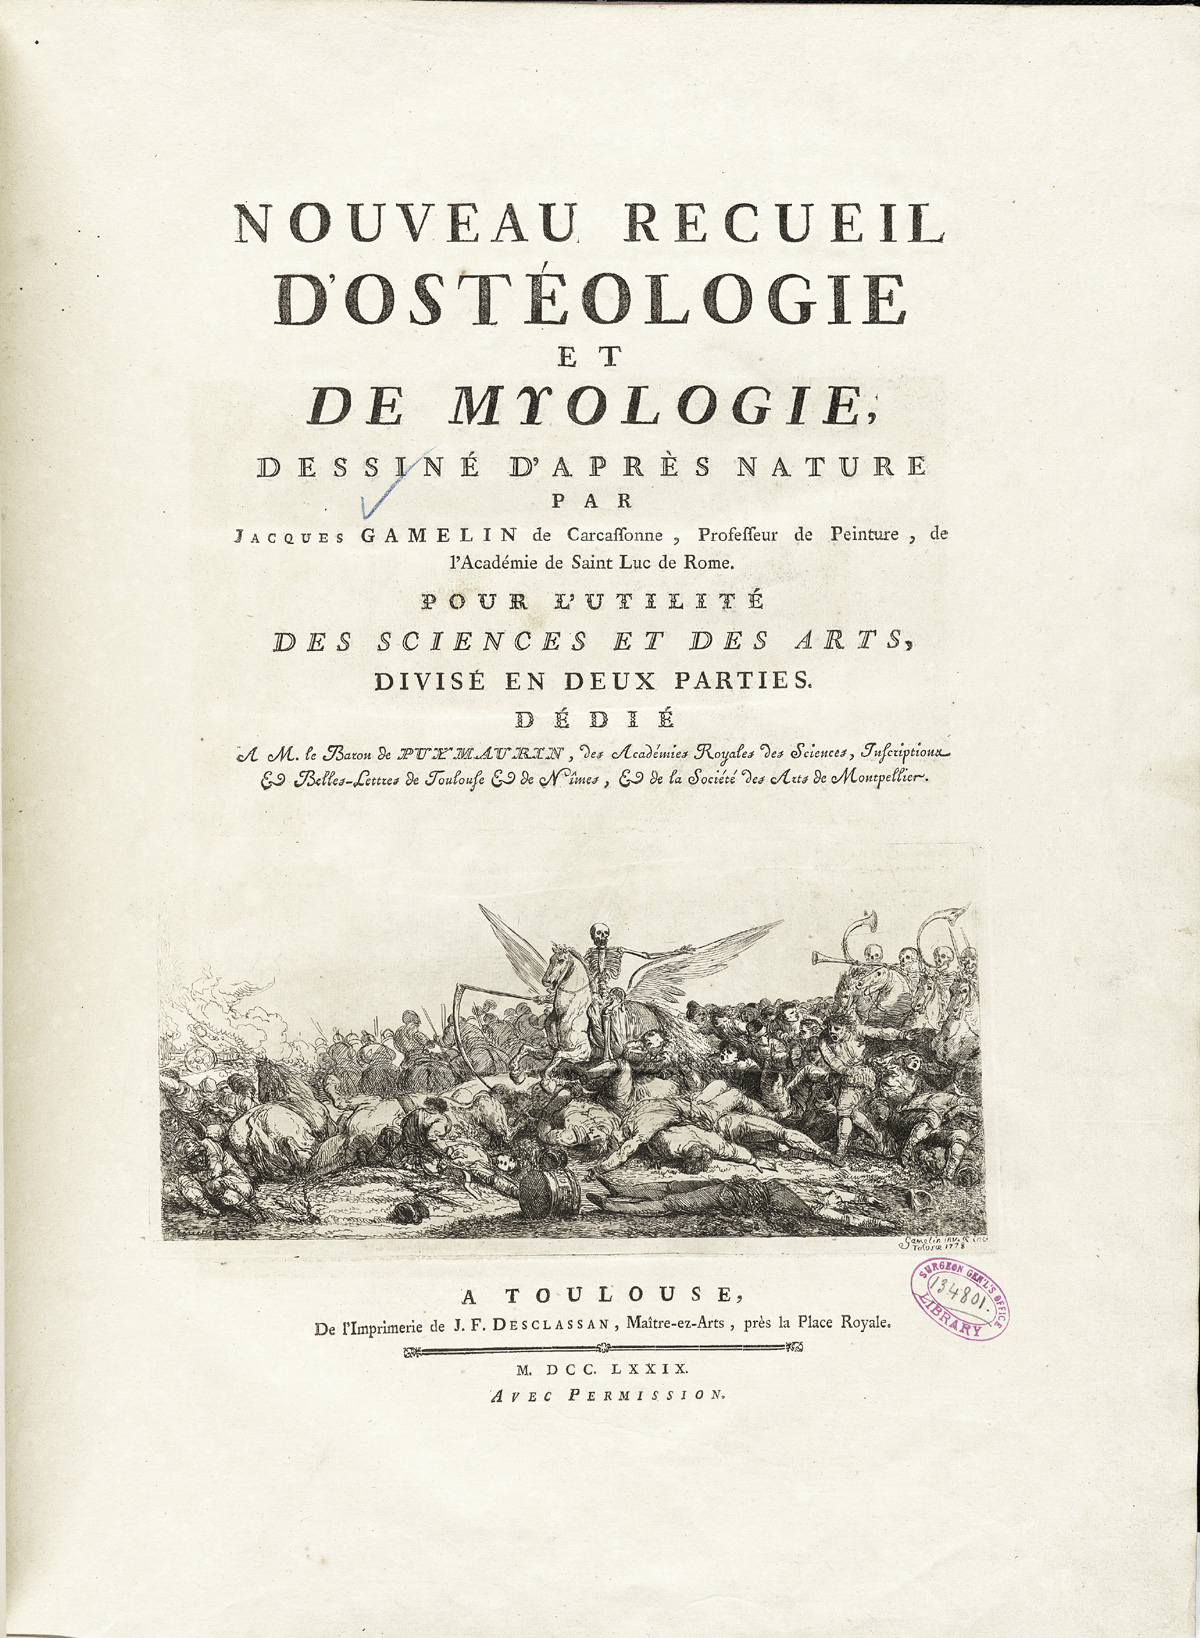 Typeset title page of Jacques Gamelin’s Nouveau recueil d’osteologie et de myologie with an engraved vignette at the bottom of the page showing death as a skeleton holding a large scythe and riding a winged horse through a battlefield with the bodies of horses and strewn about and with a procession of skeletons behind; NLM Call no.: WZ 260 G178m 1779.